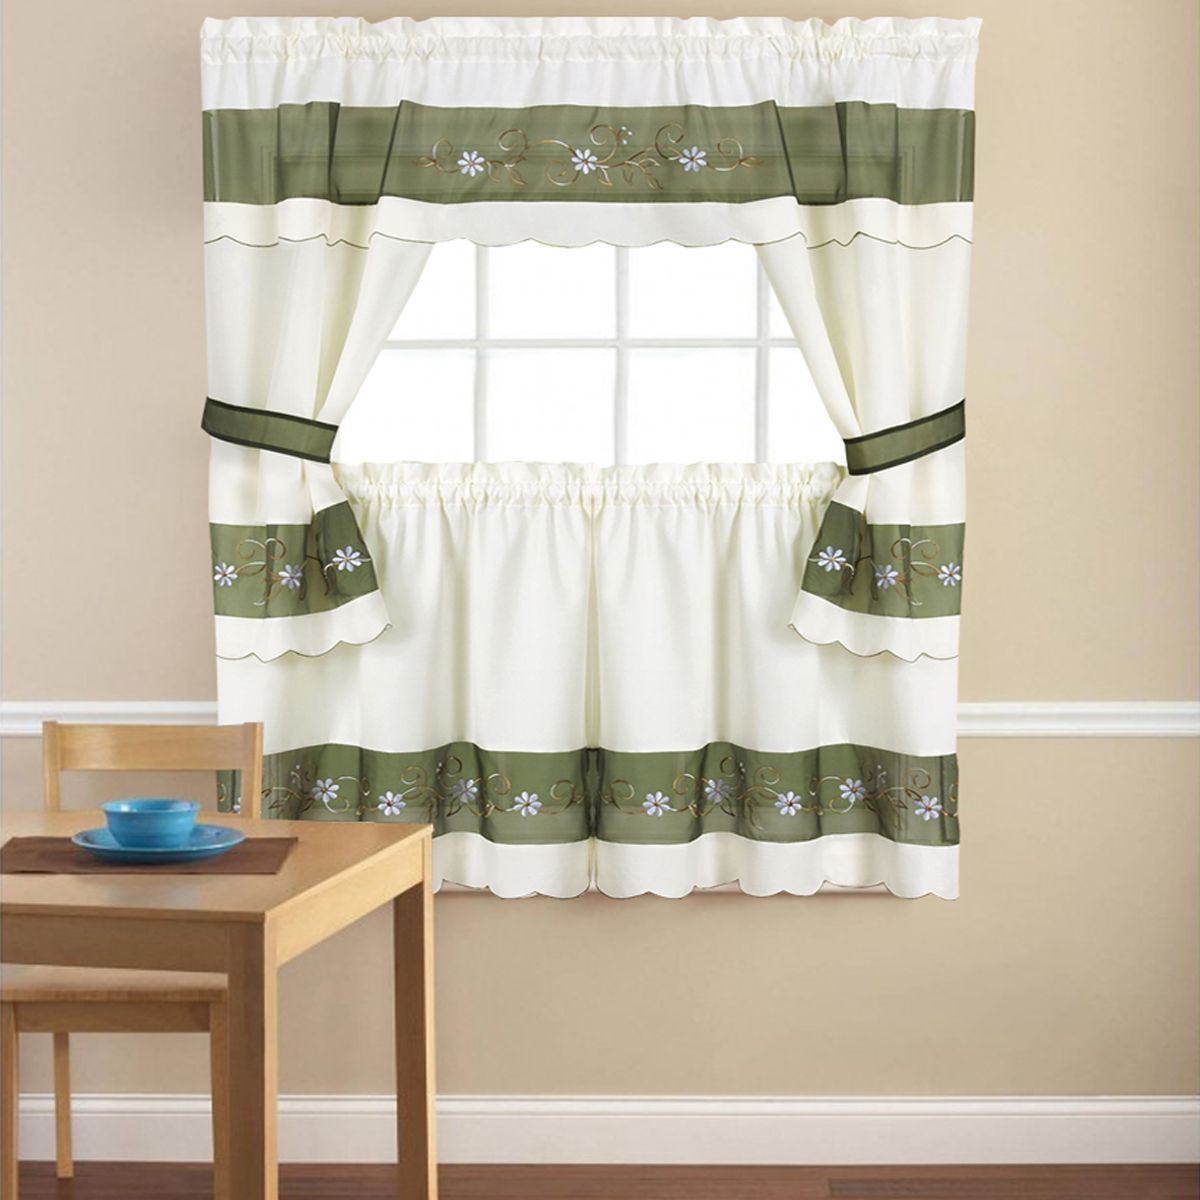 Details About Embroidered Berkshire Floral 5 Piece Kitchen Curtain Cottage  Set – 36" Or 24" Pertaining To Embroidered Floral 5 Piece Kitchen Curtain Sets (Photo 1 of 20)